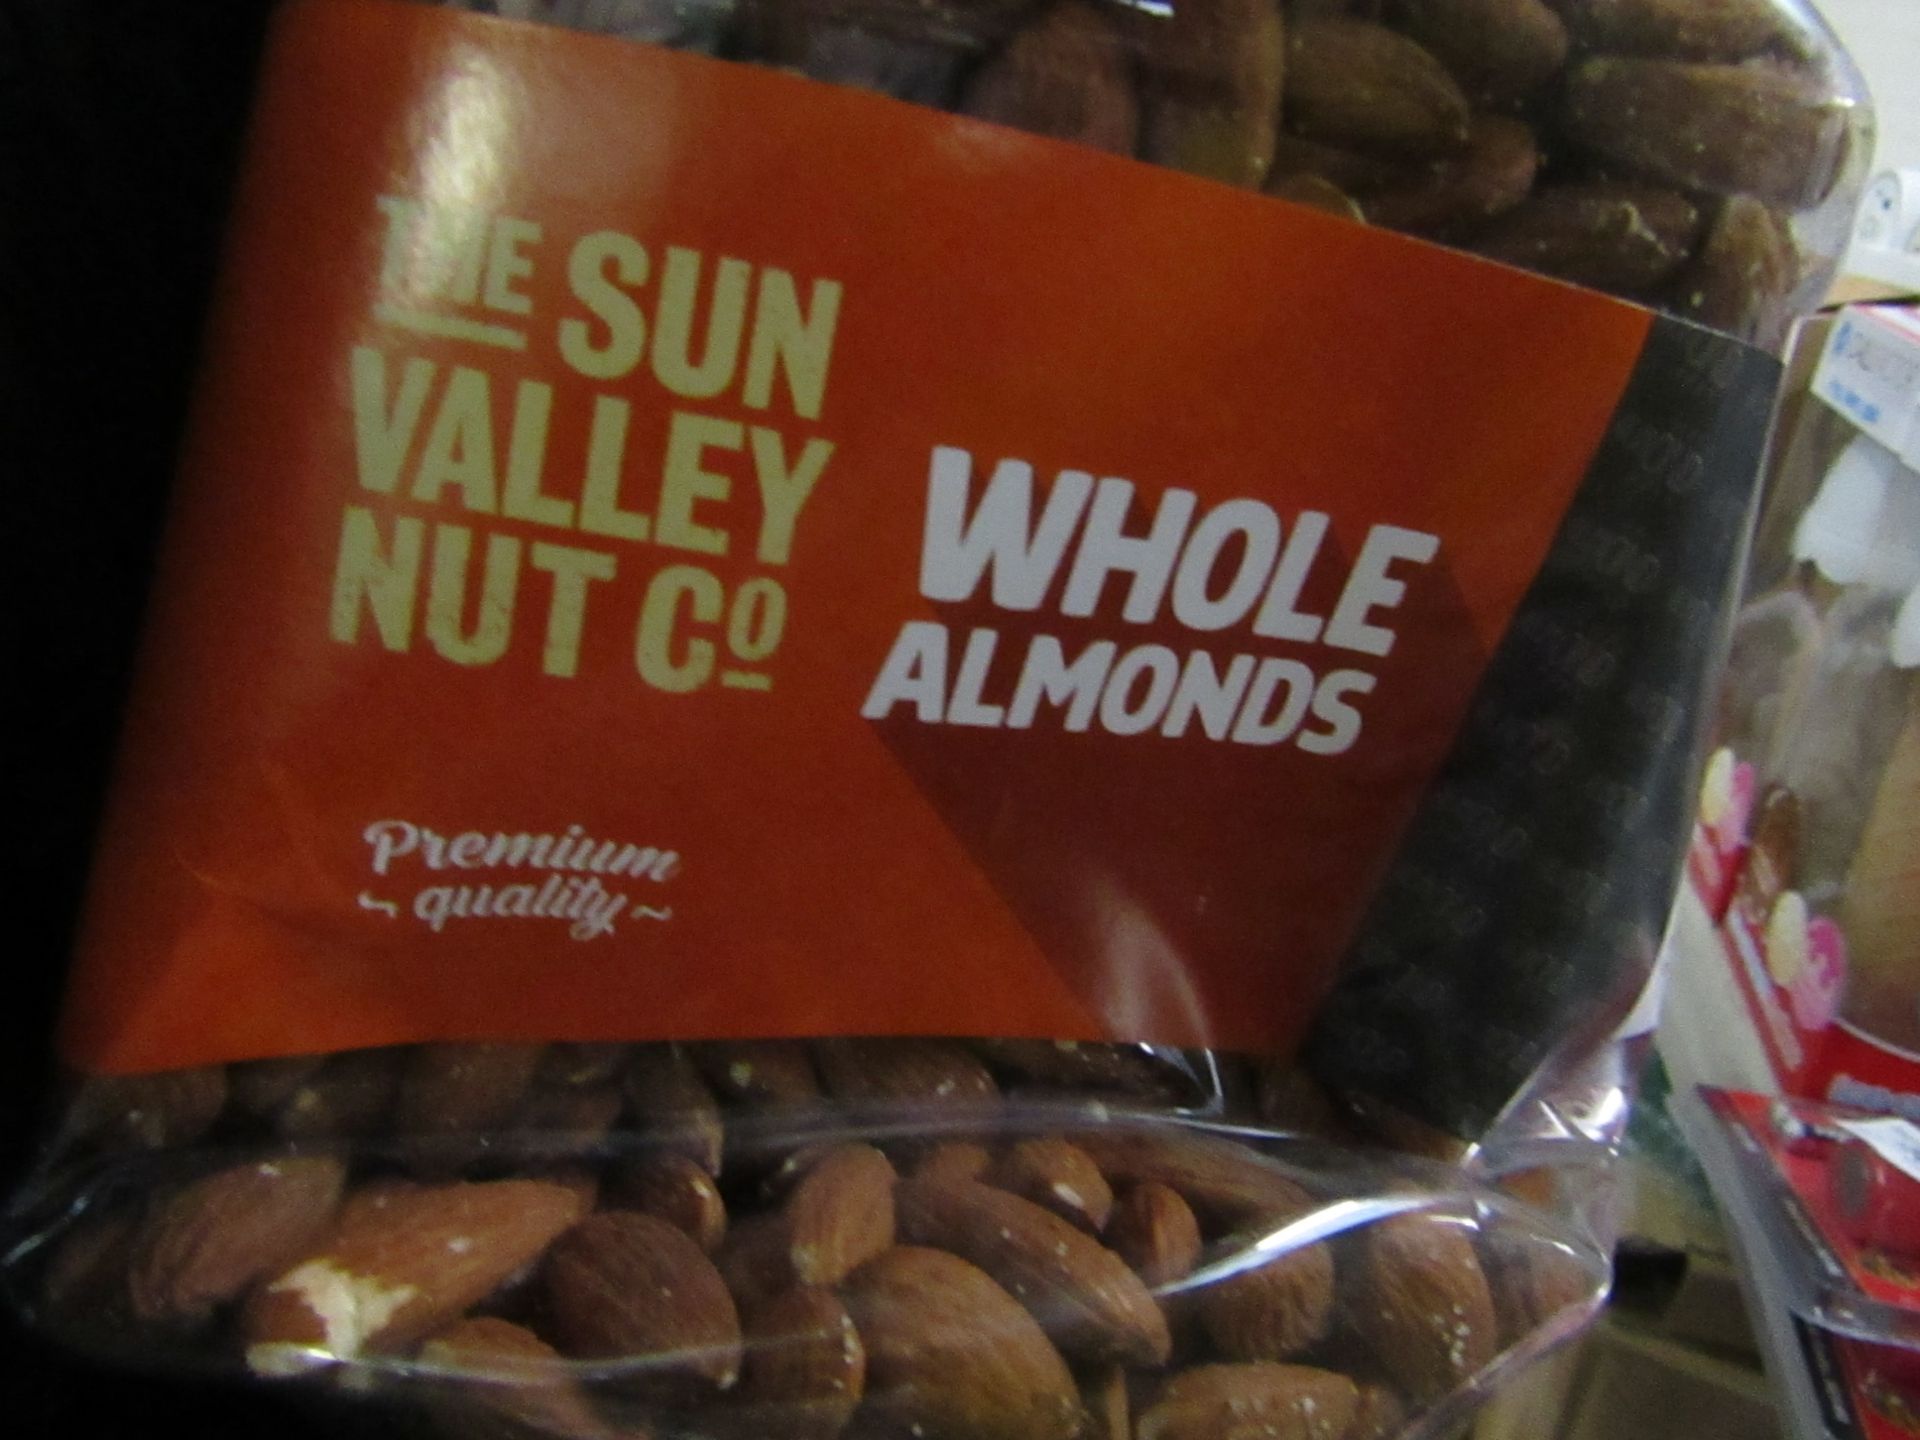 1.136kg The Sun Valley Nut co Whole Almonds. BB May 2021